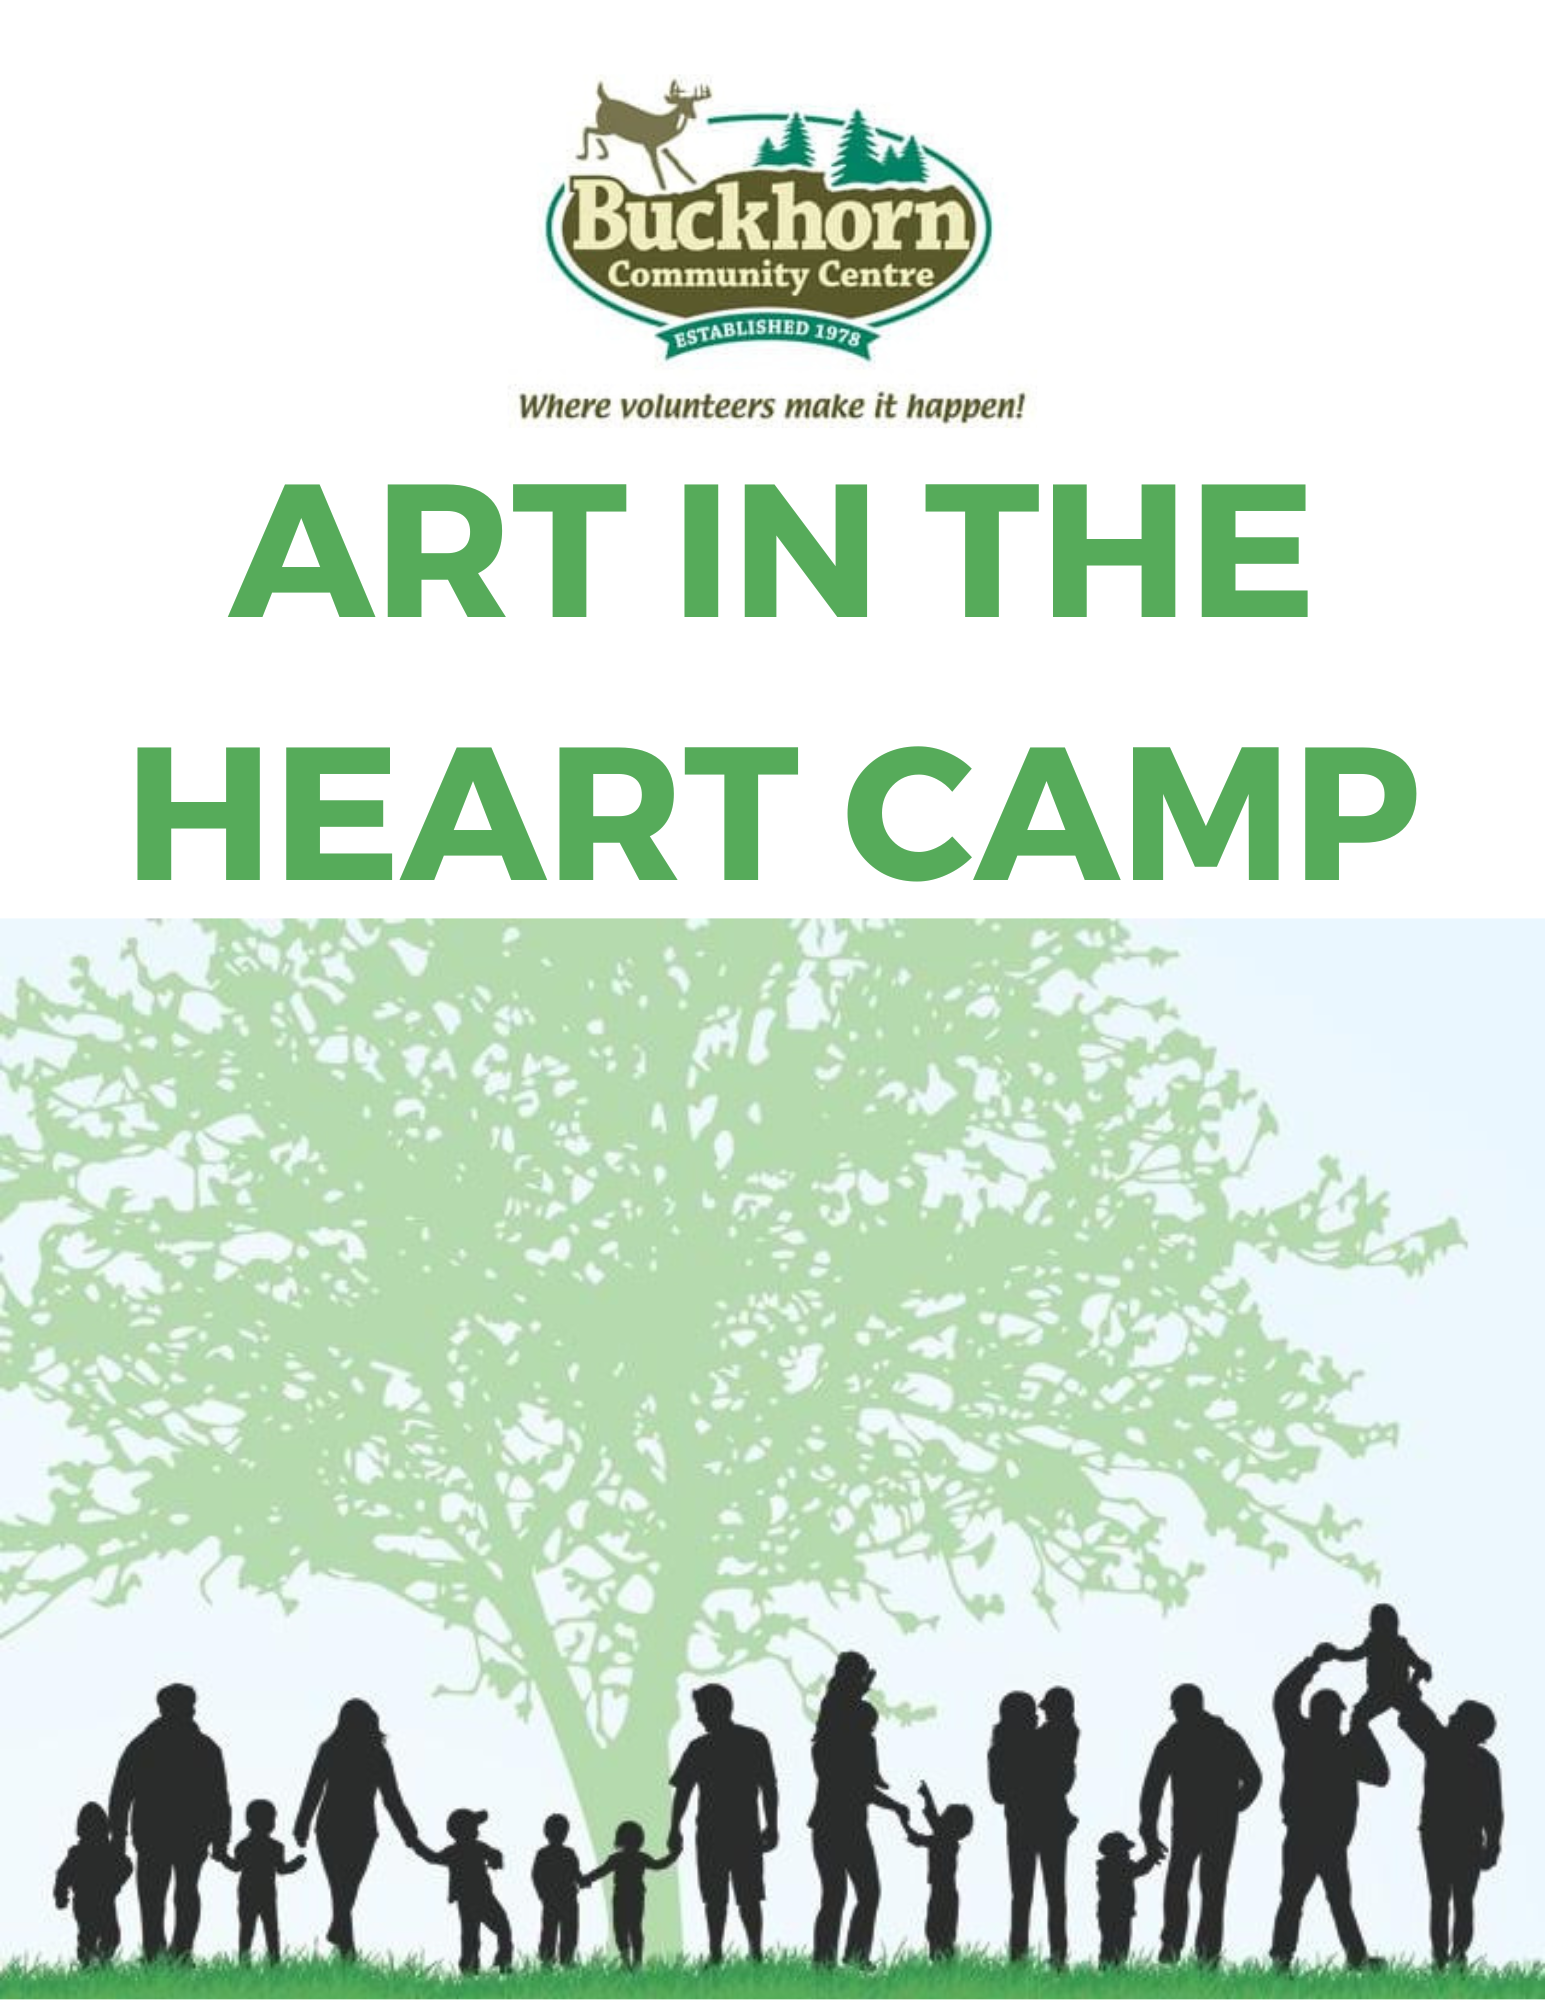 ART IN THE HEART CAMP